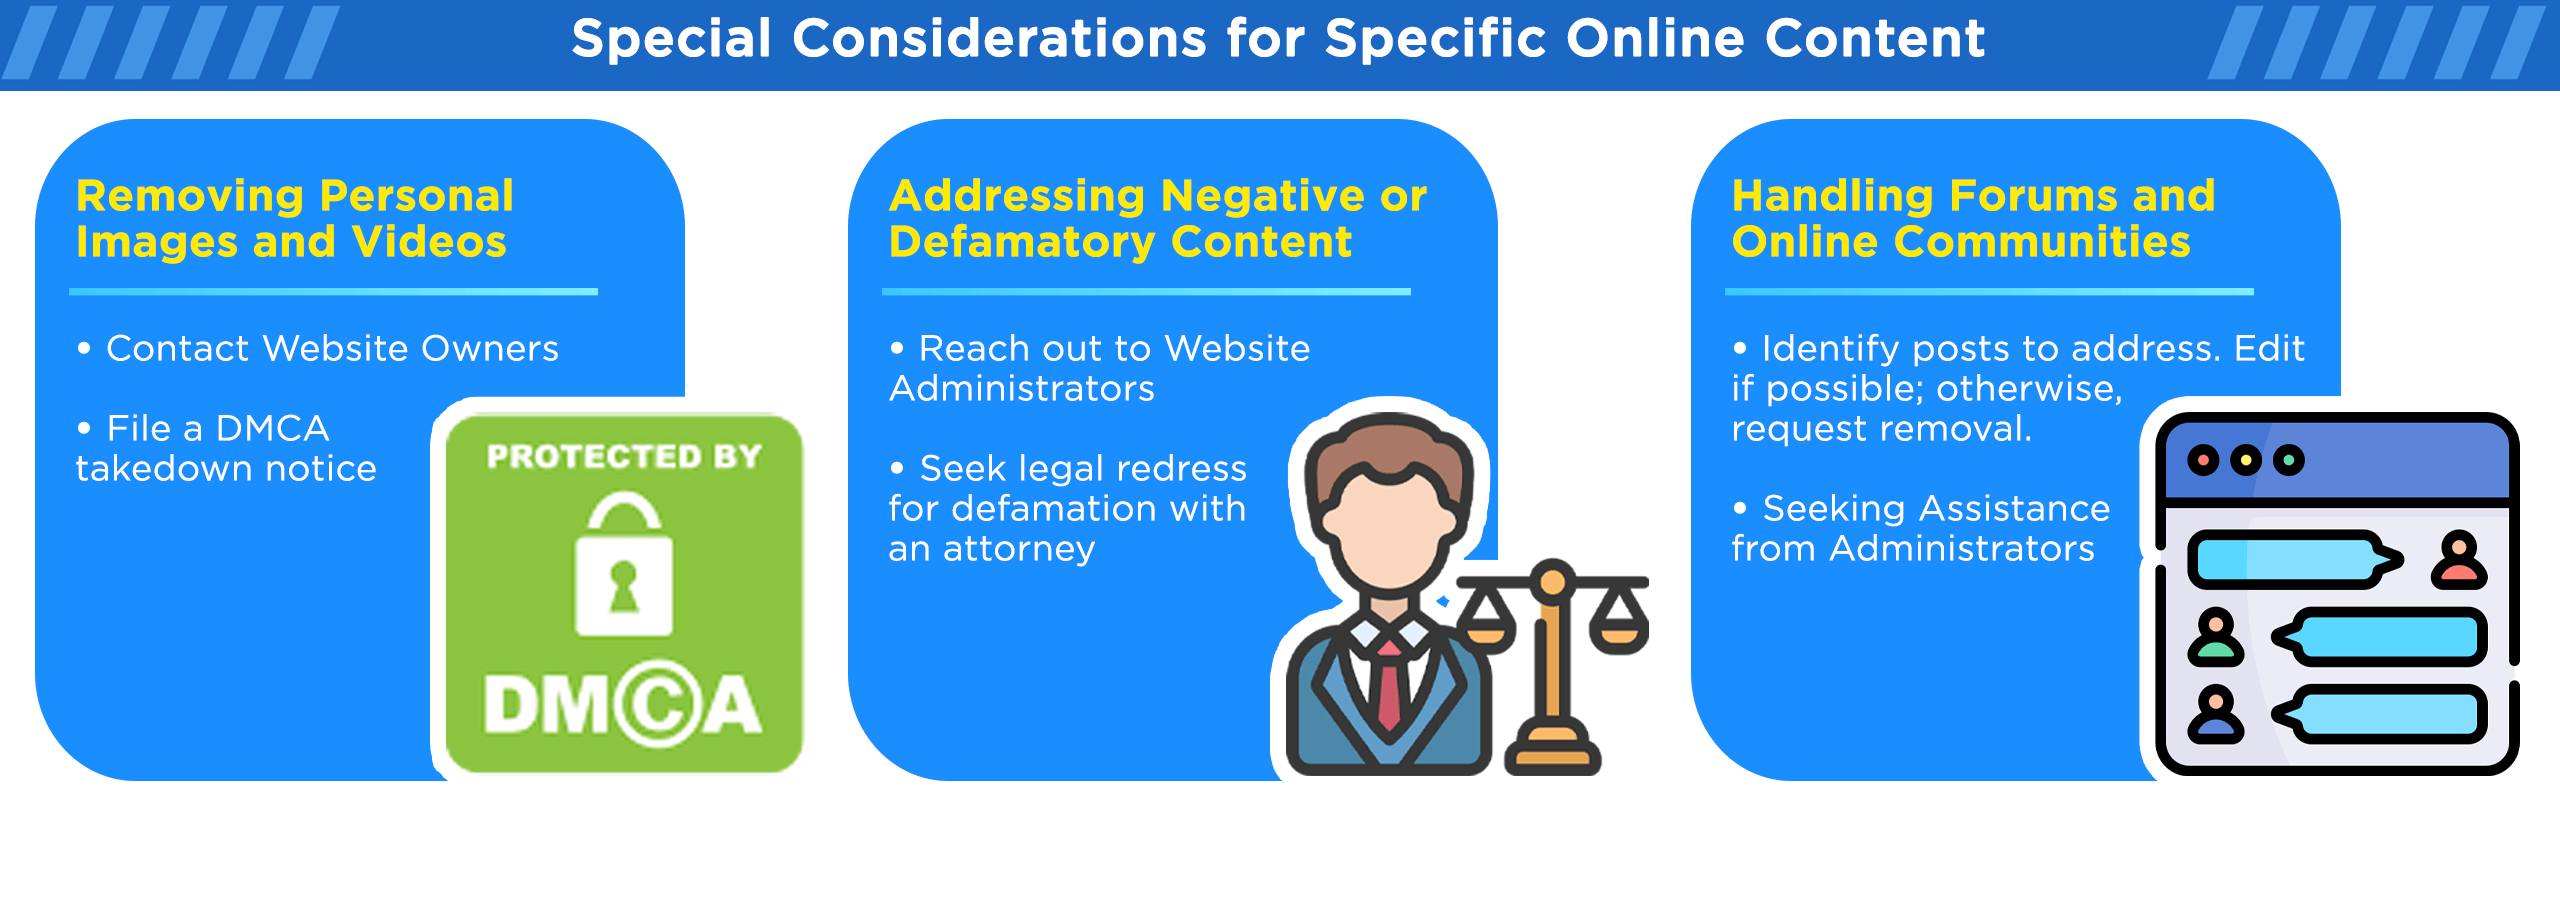 Special considerations for specific online content